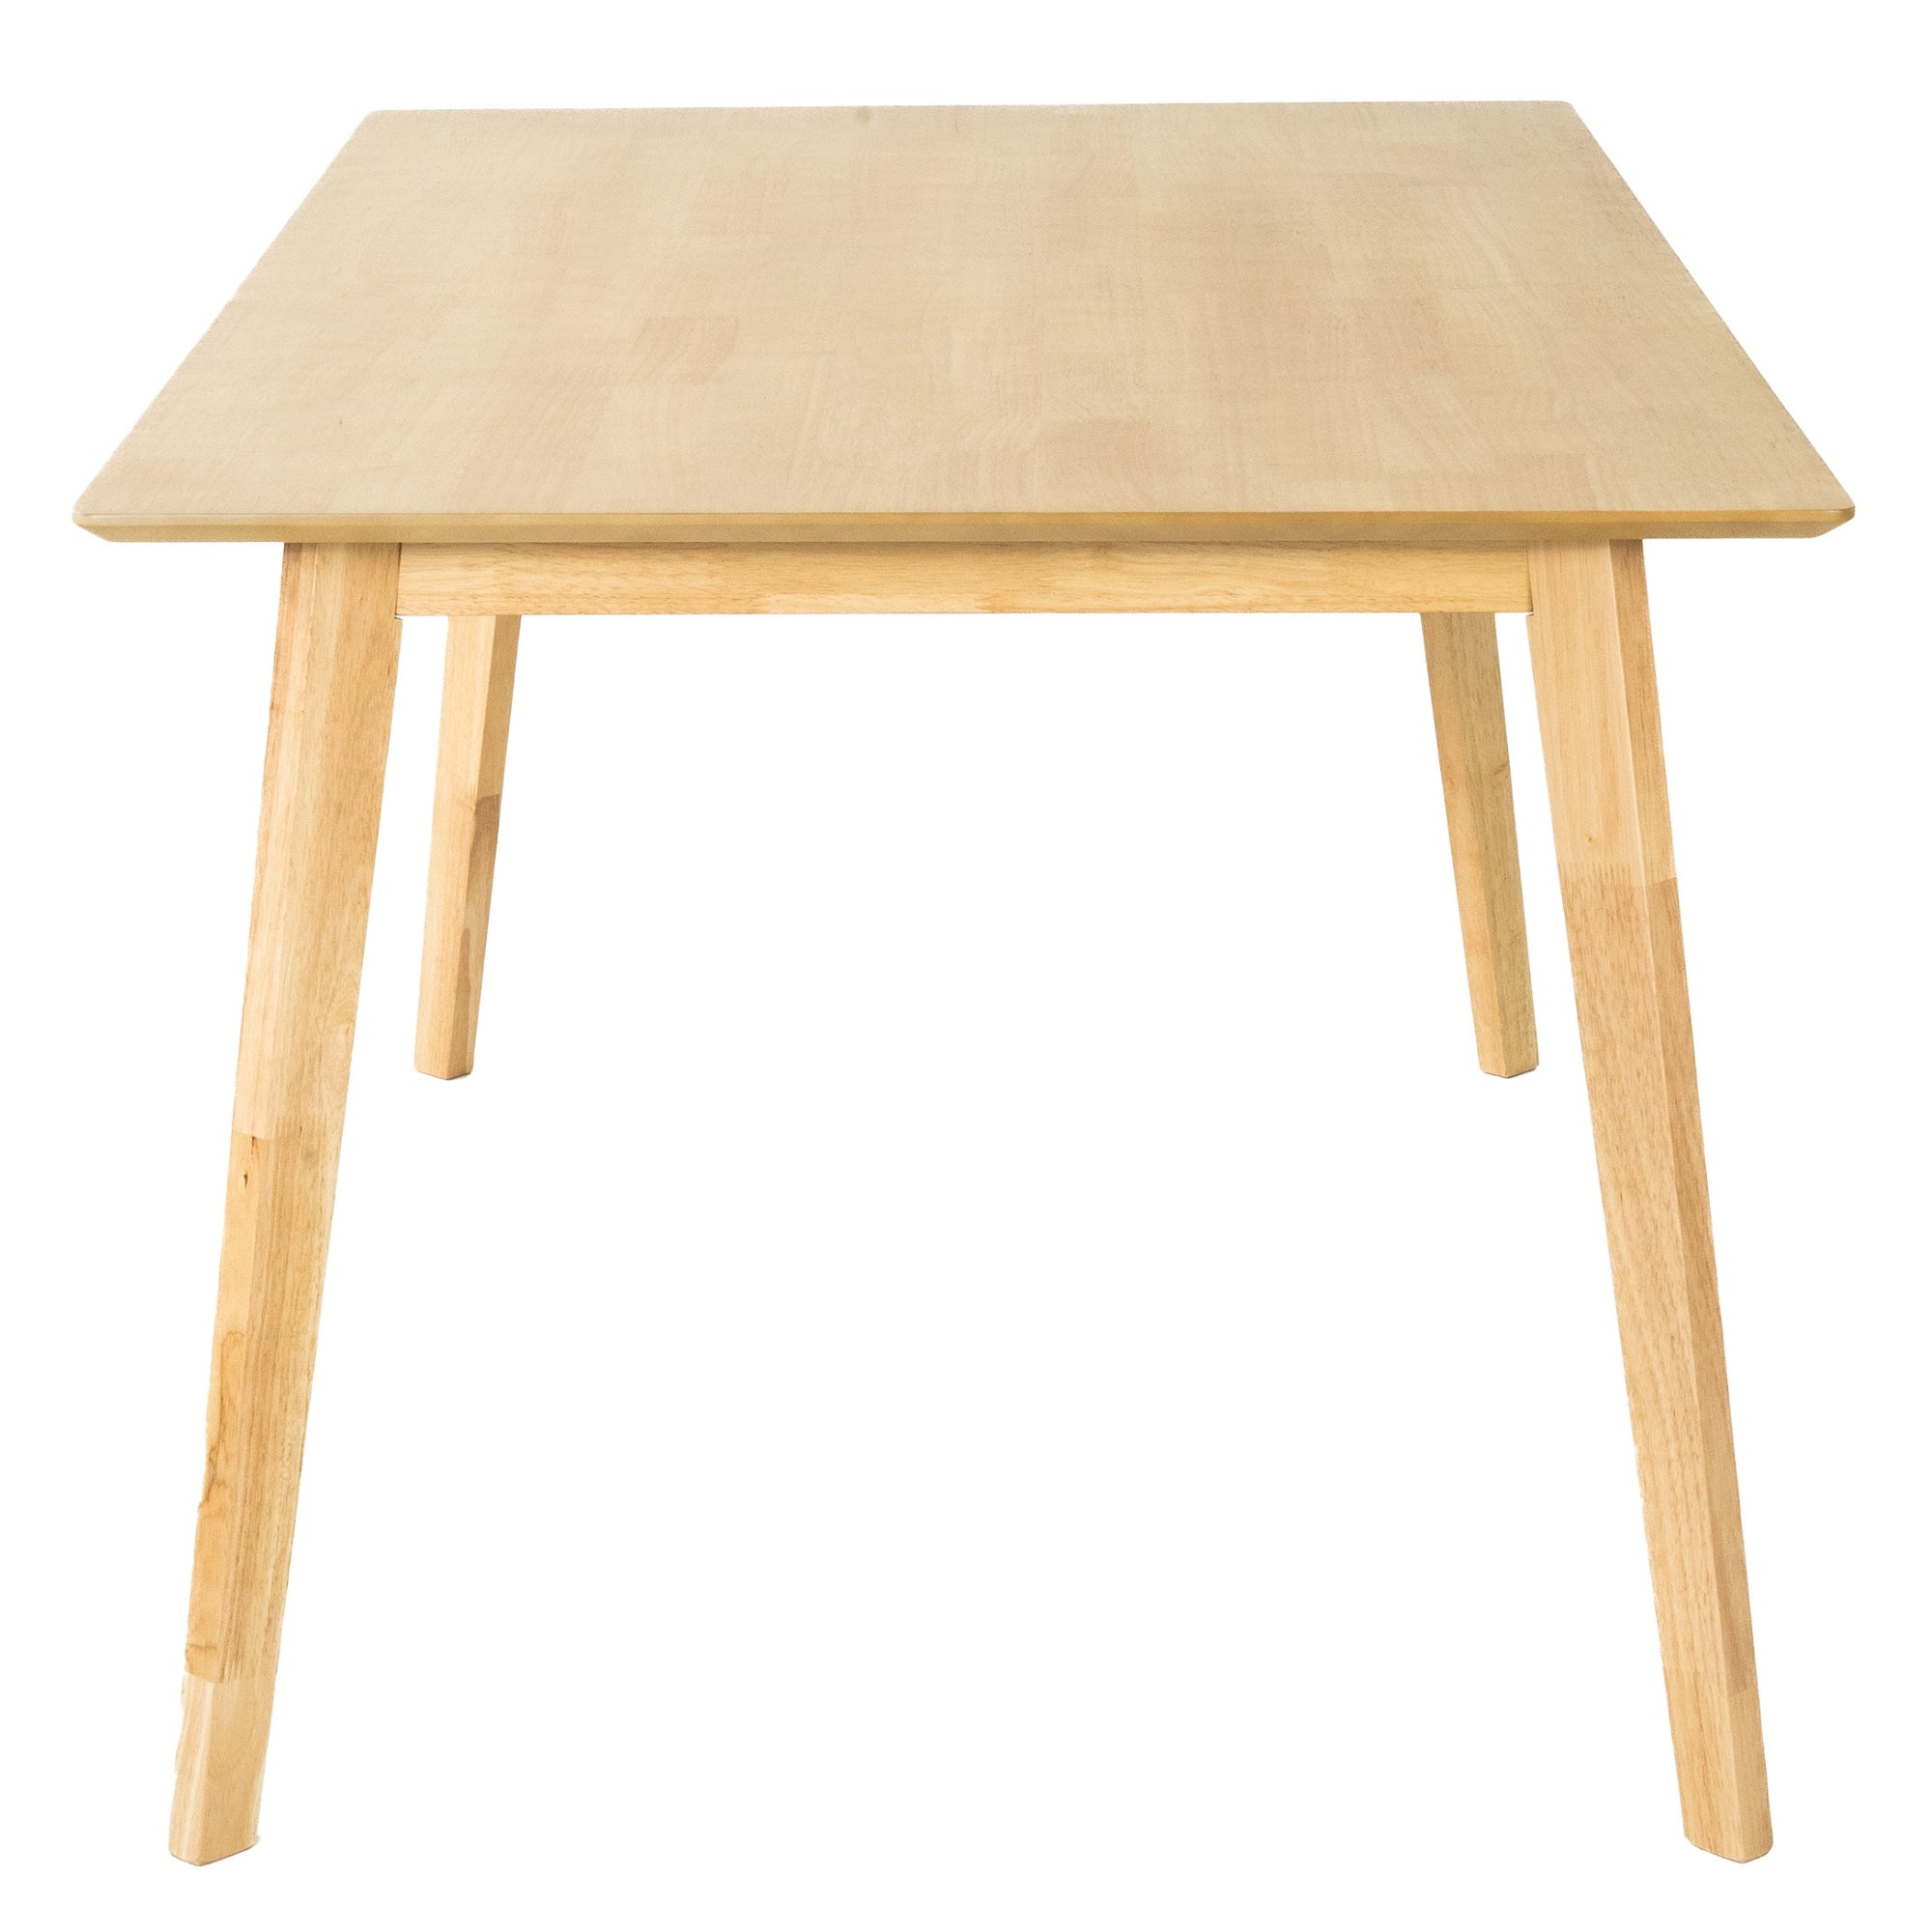 Cusco 150cm Dining Table Scandinavian Style Solid Rubberwood Natural